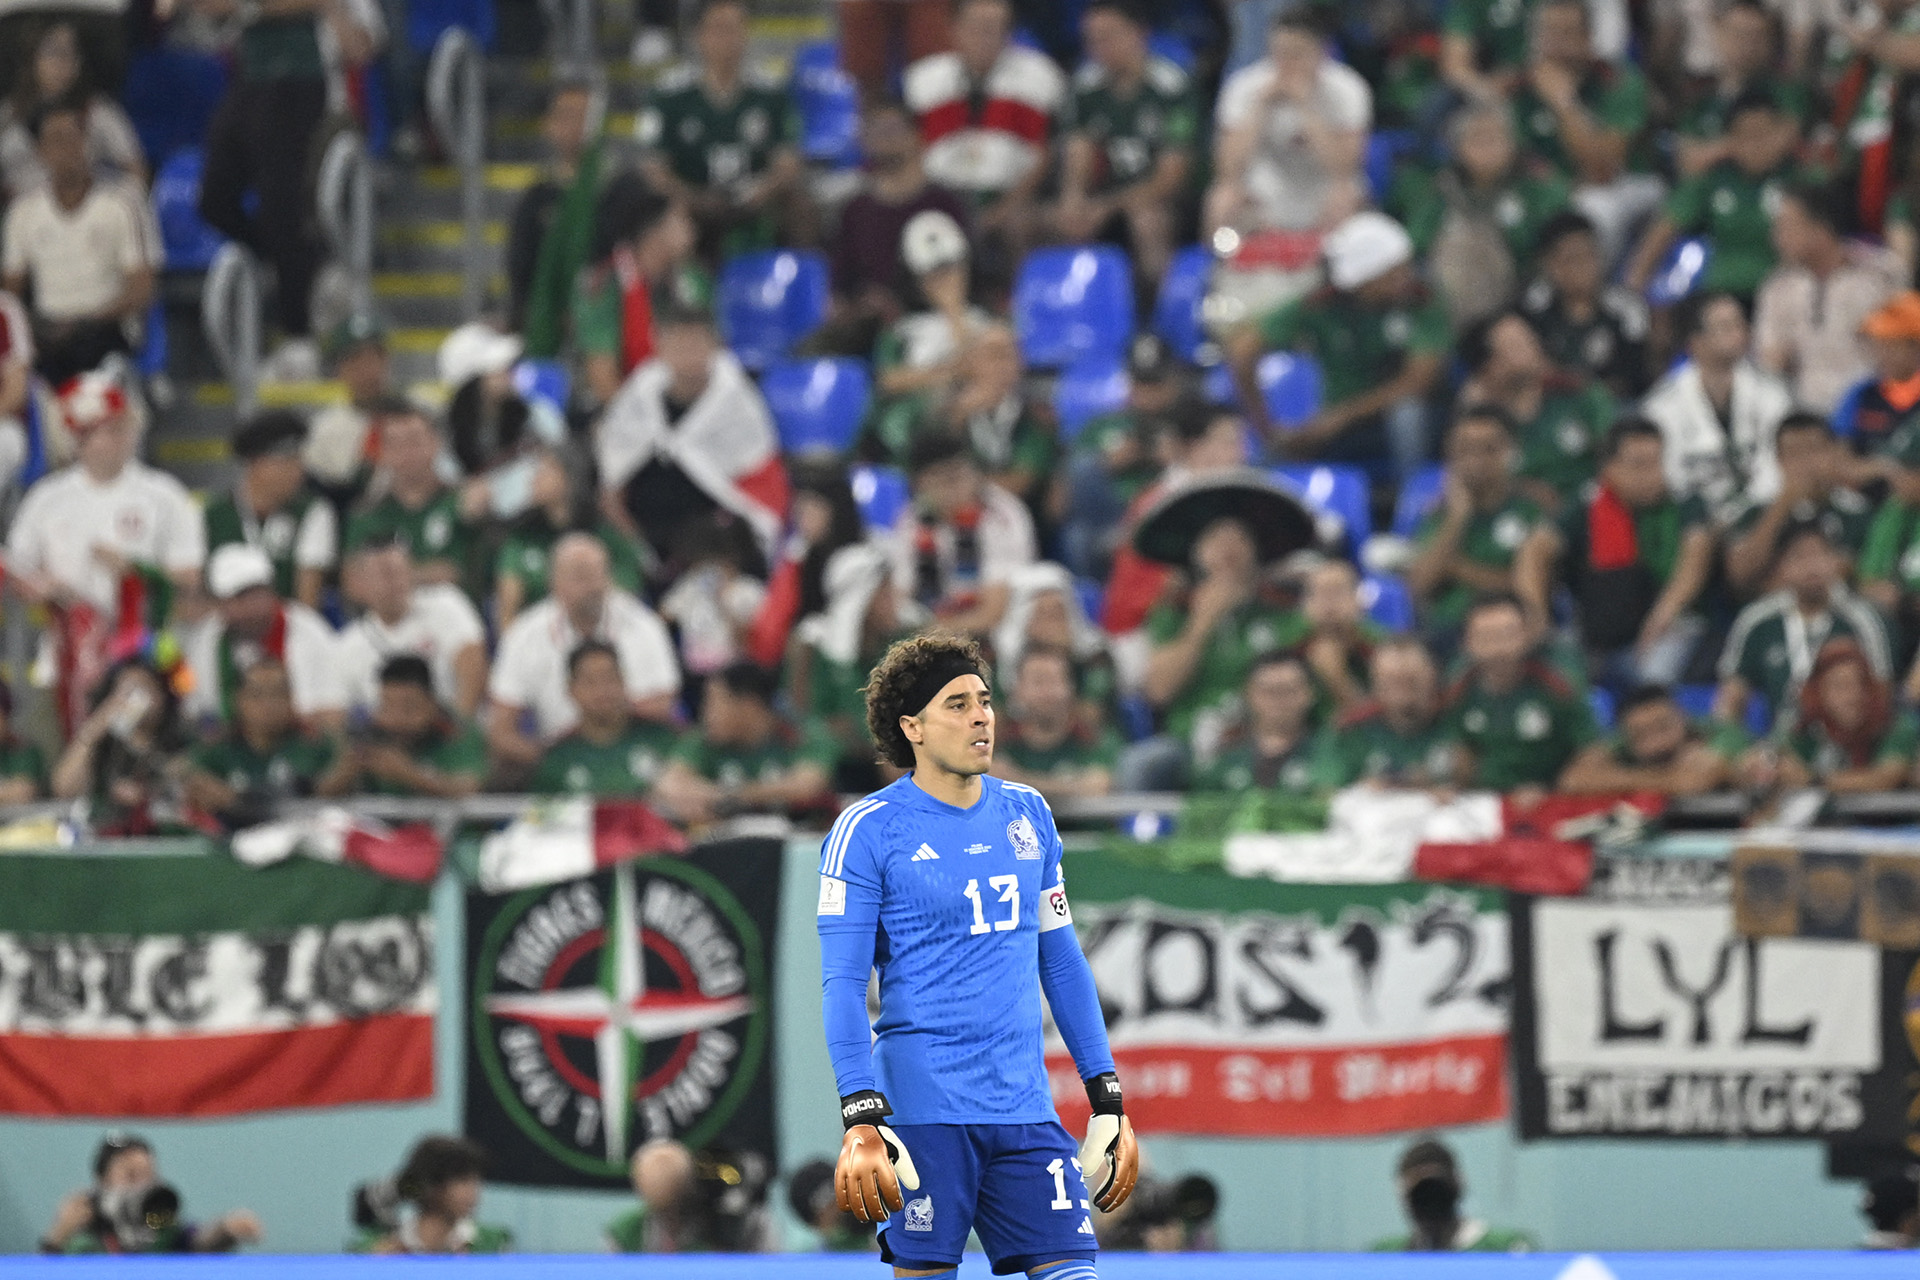 Mexico's goalkeeper #13 Guillermo Ochoa looks on during the Qatar 2022 World Cup Group C football match between Mexico and Poland at Stadium 974 in Doha on November 22, 2022. (Photo by Alfredo ESTRELLA / AFP)